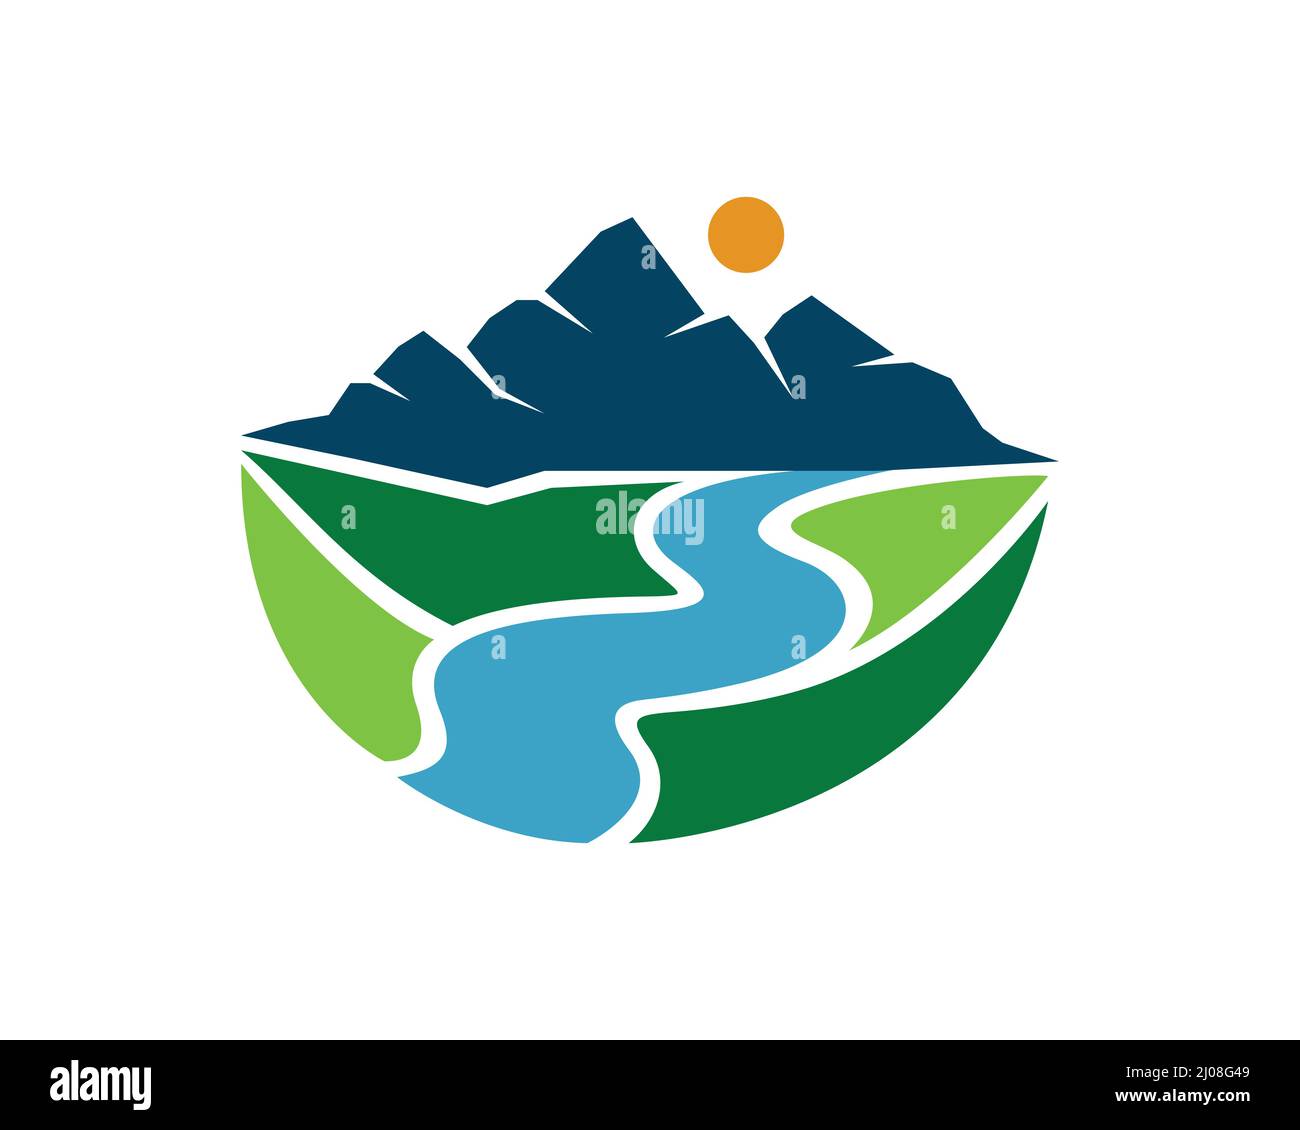 Valley, River, Cliff, Mountain and Landscape Stock Vector